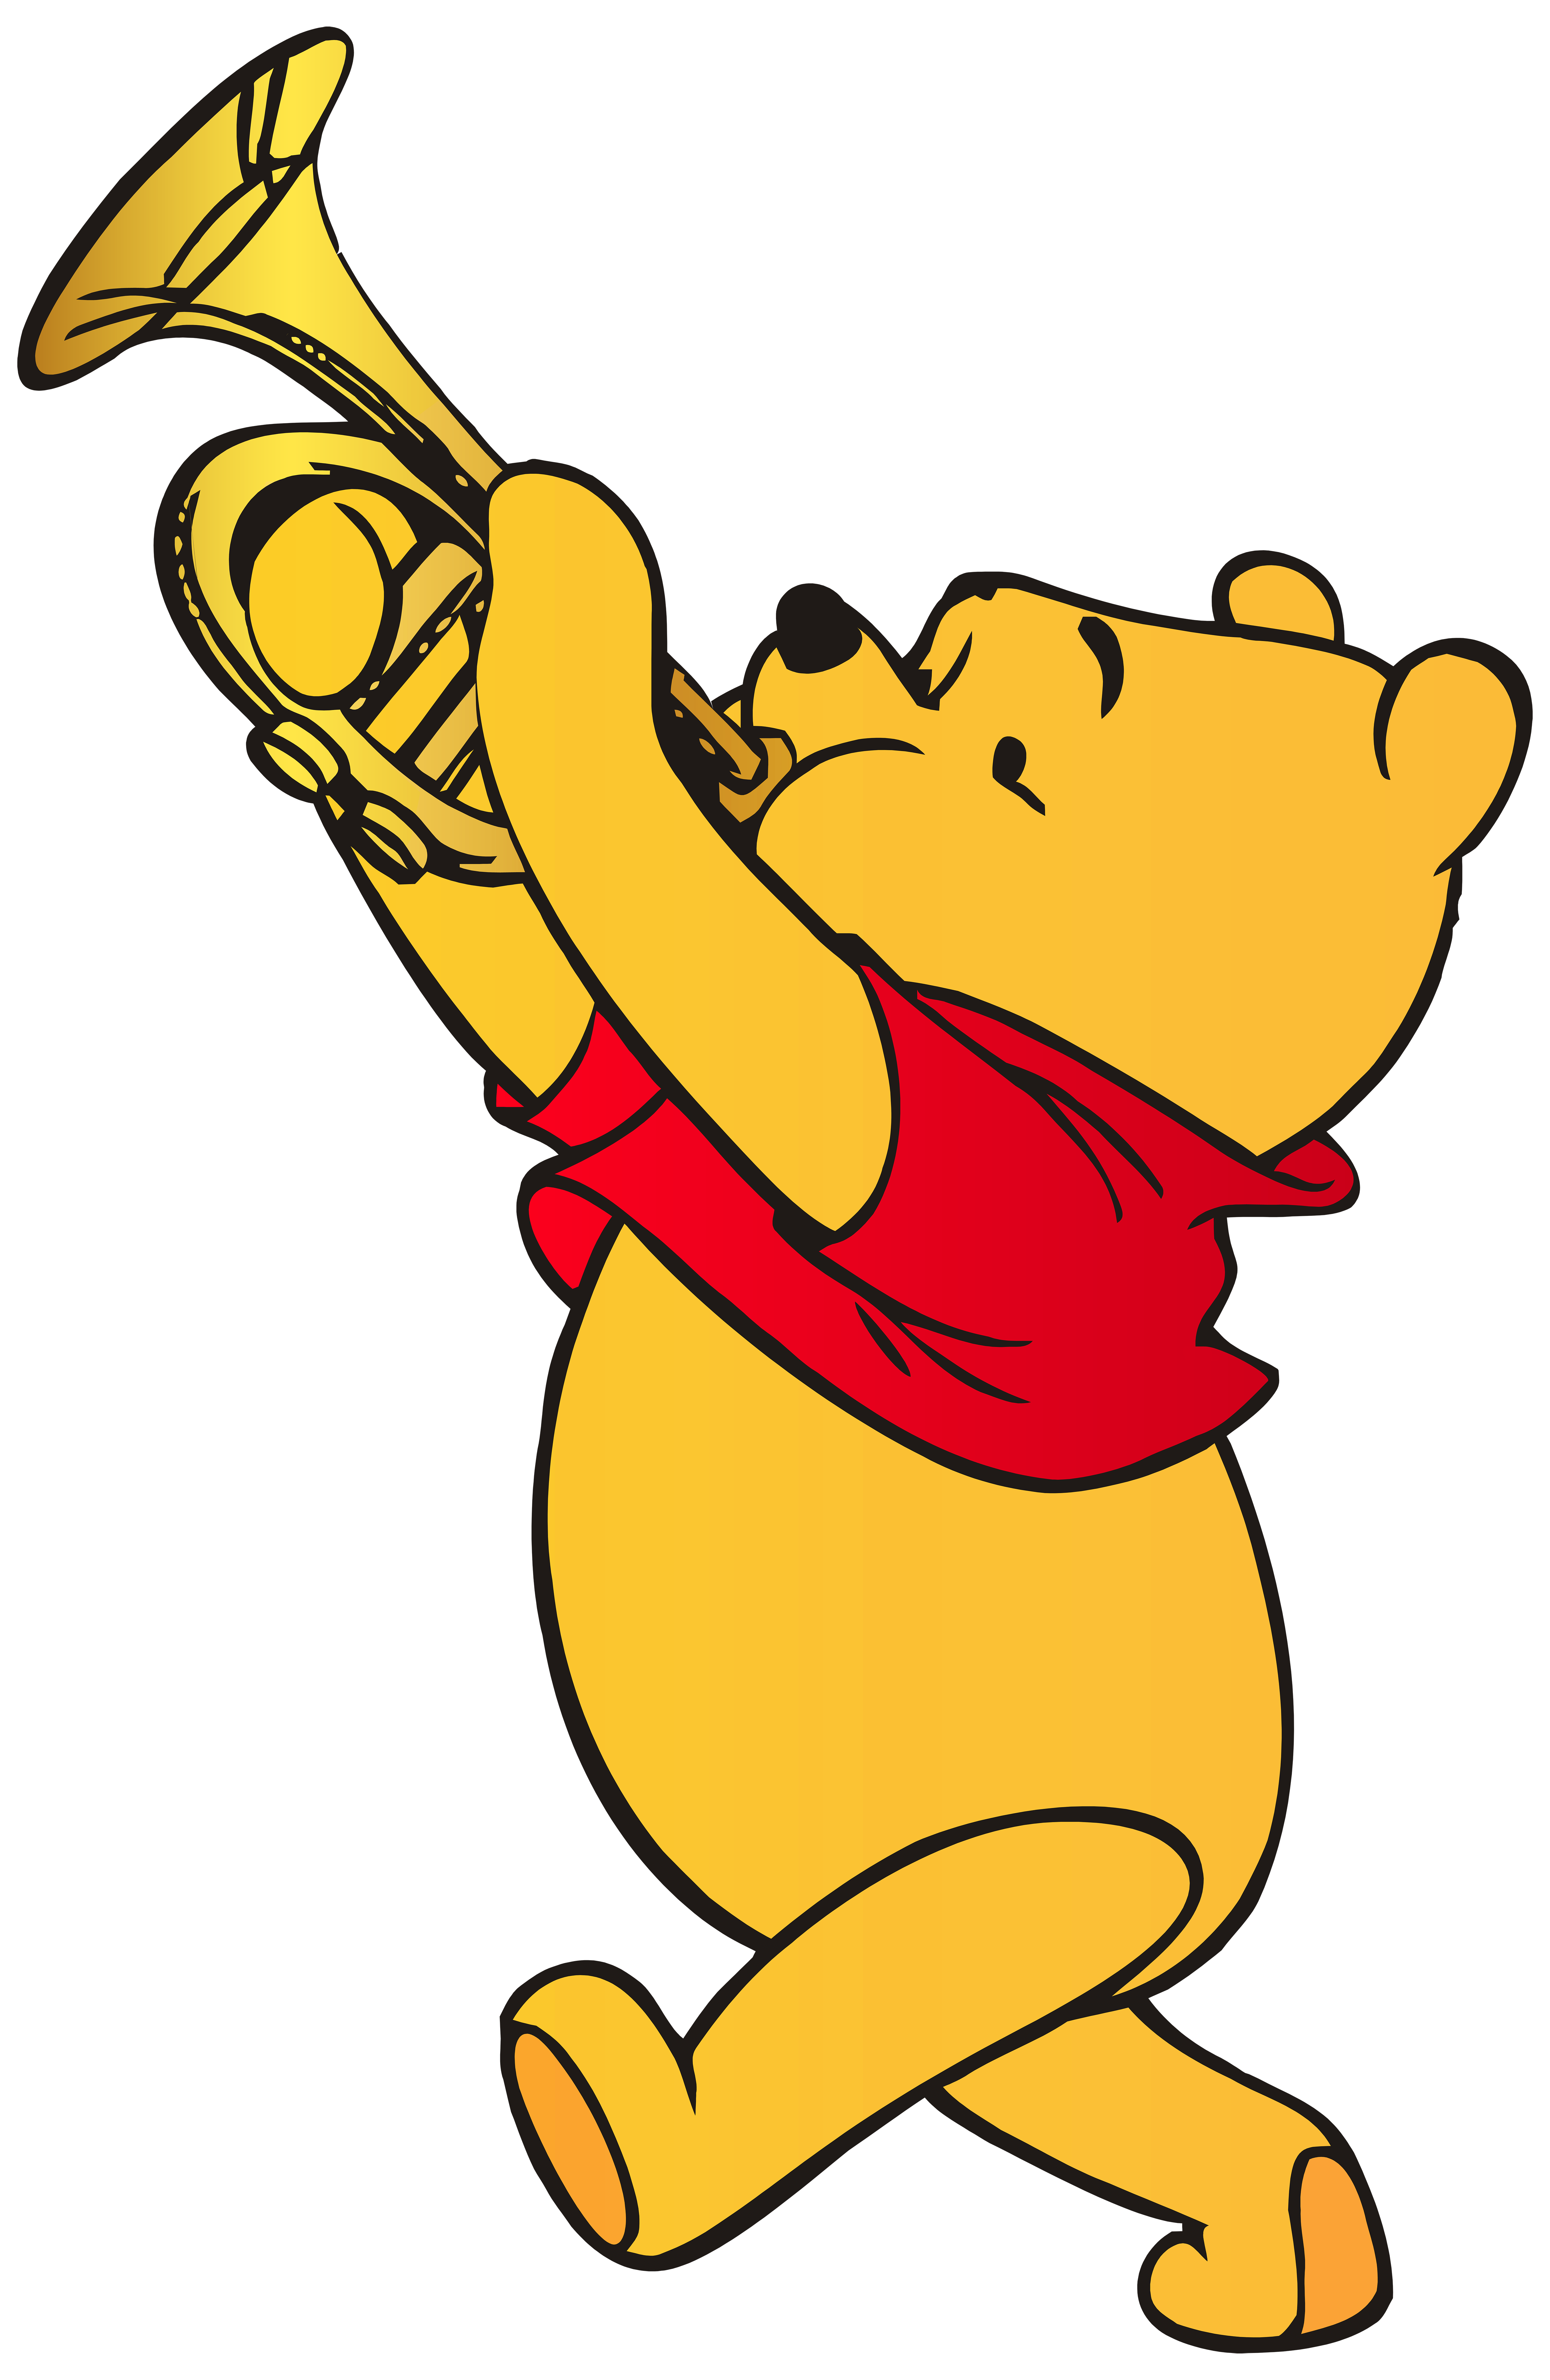 Winnie the Pooh Playing Trumpet PNG Clip Art - Best WEB Clipart